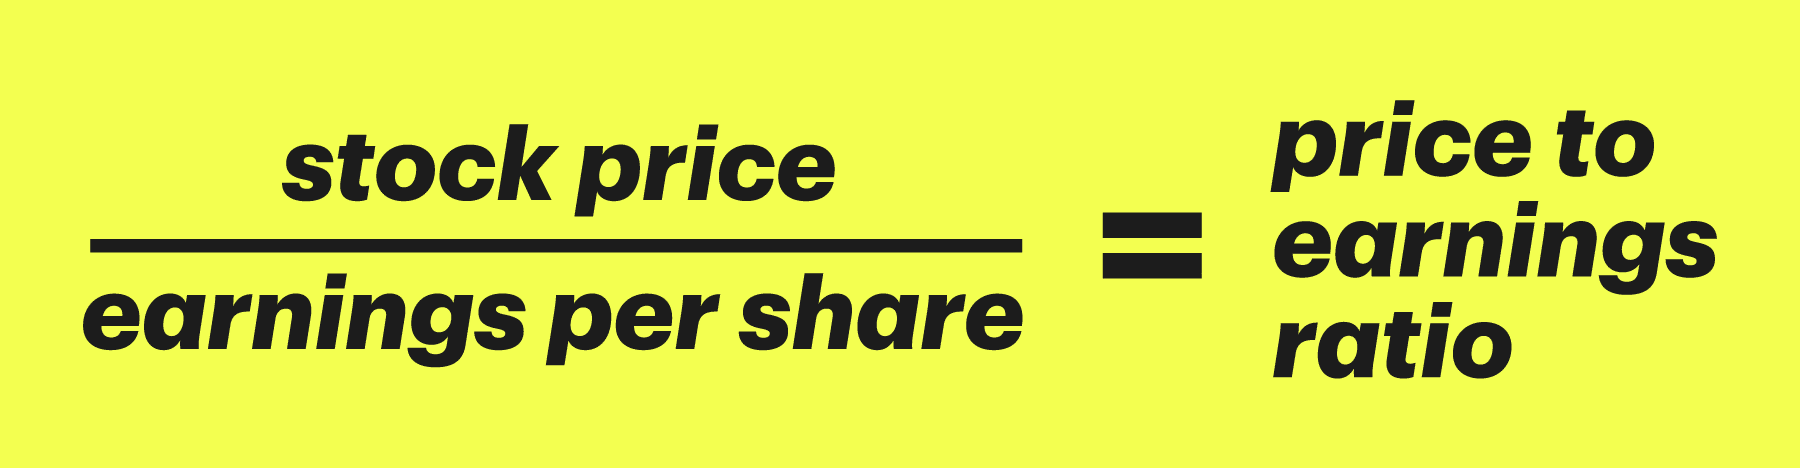 Equation that states "Stock Price over Earnings Per Share equals Price to Earnings Ratio"